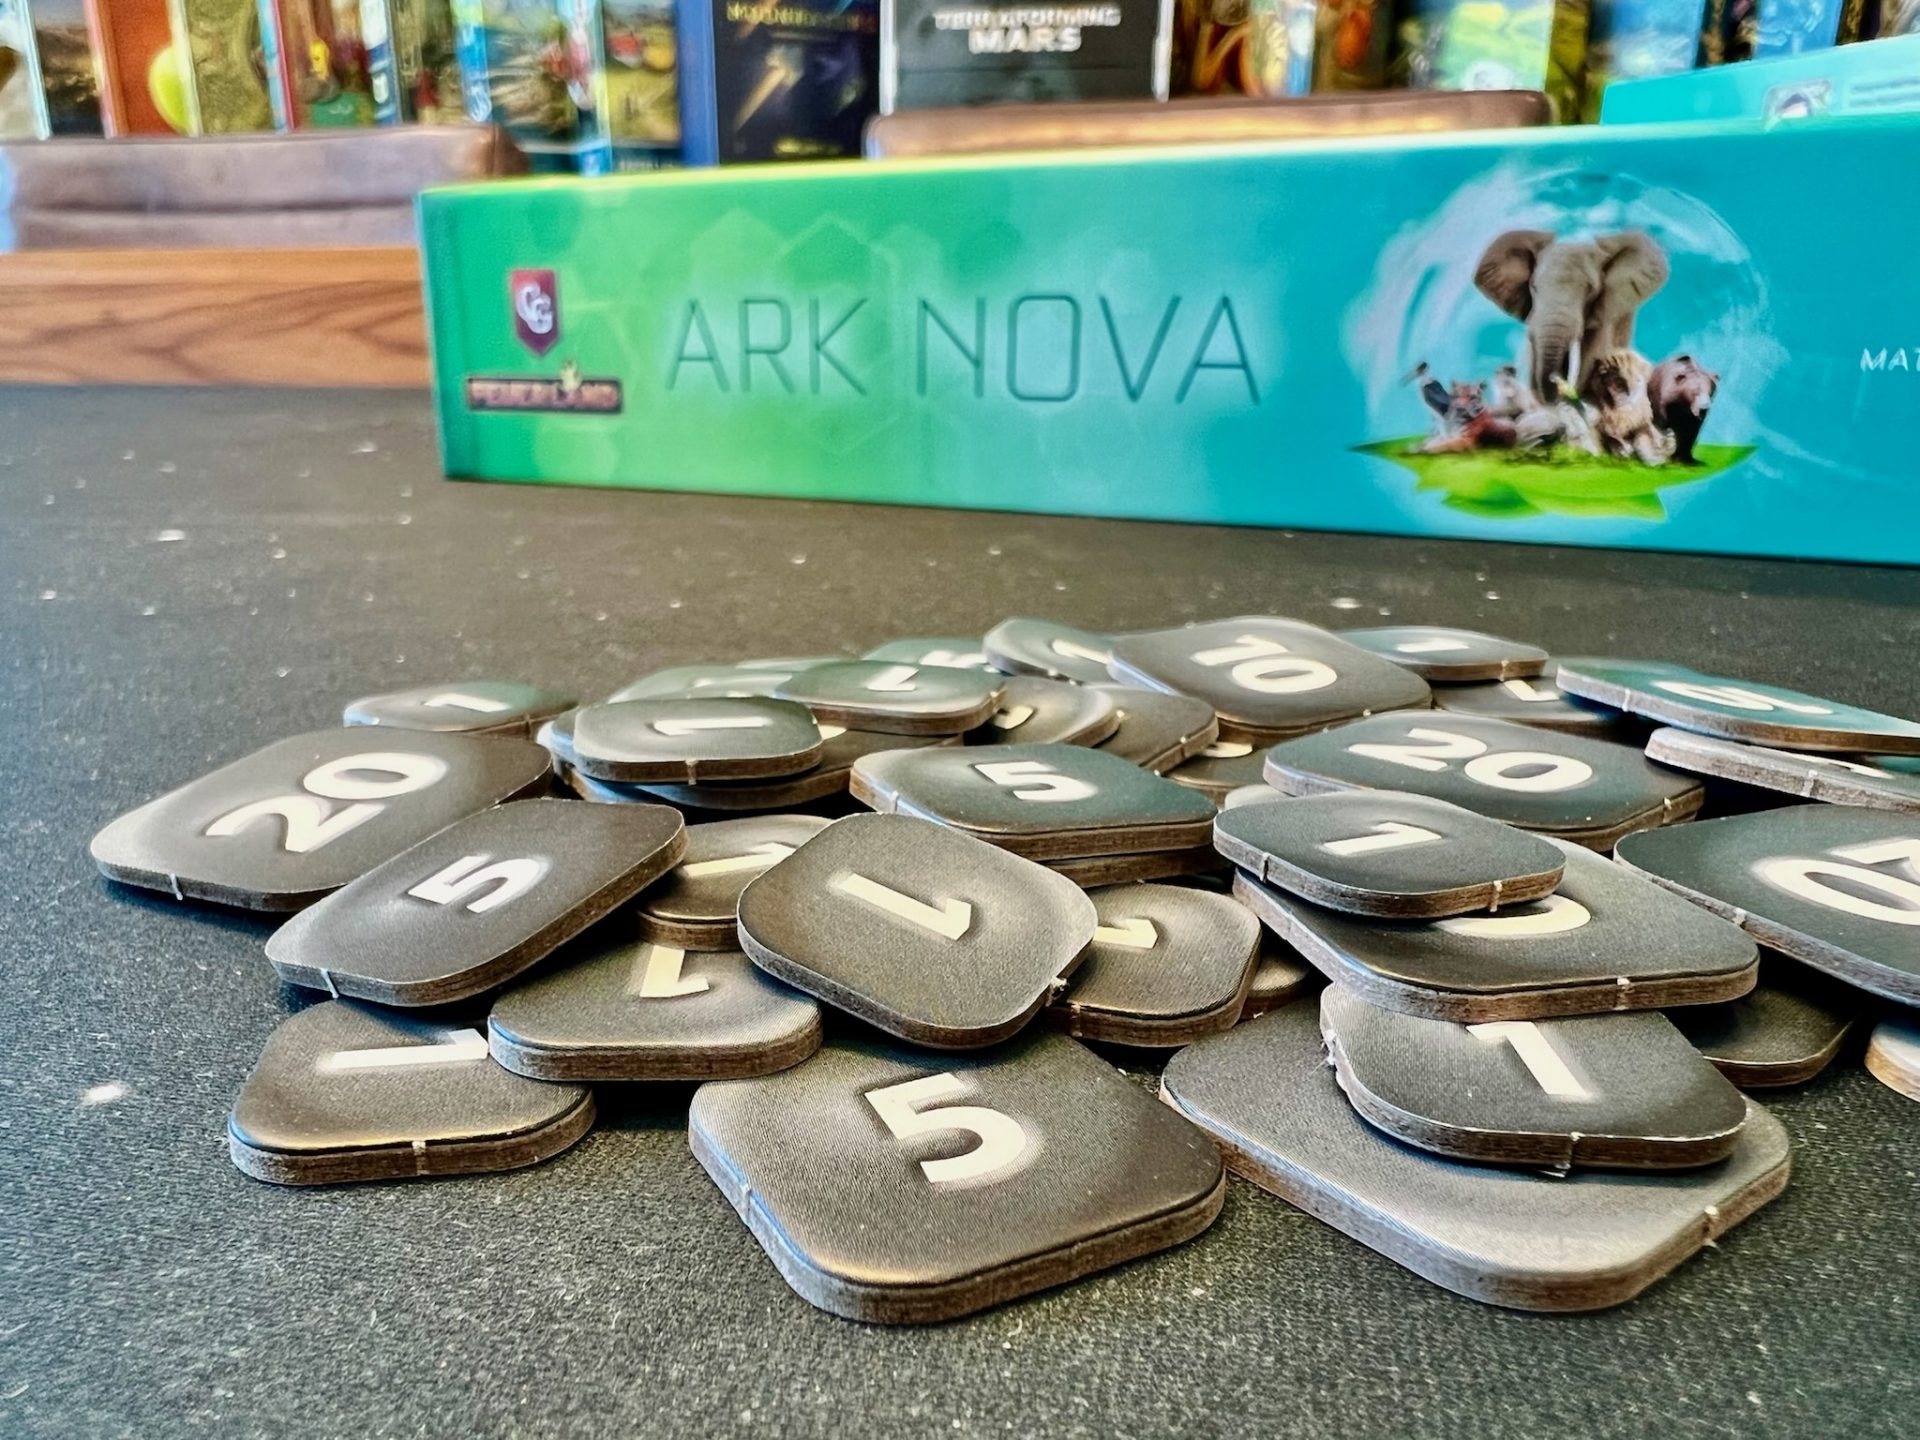 Ark Nova review – it's all happening at the zoo